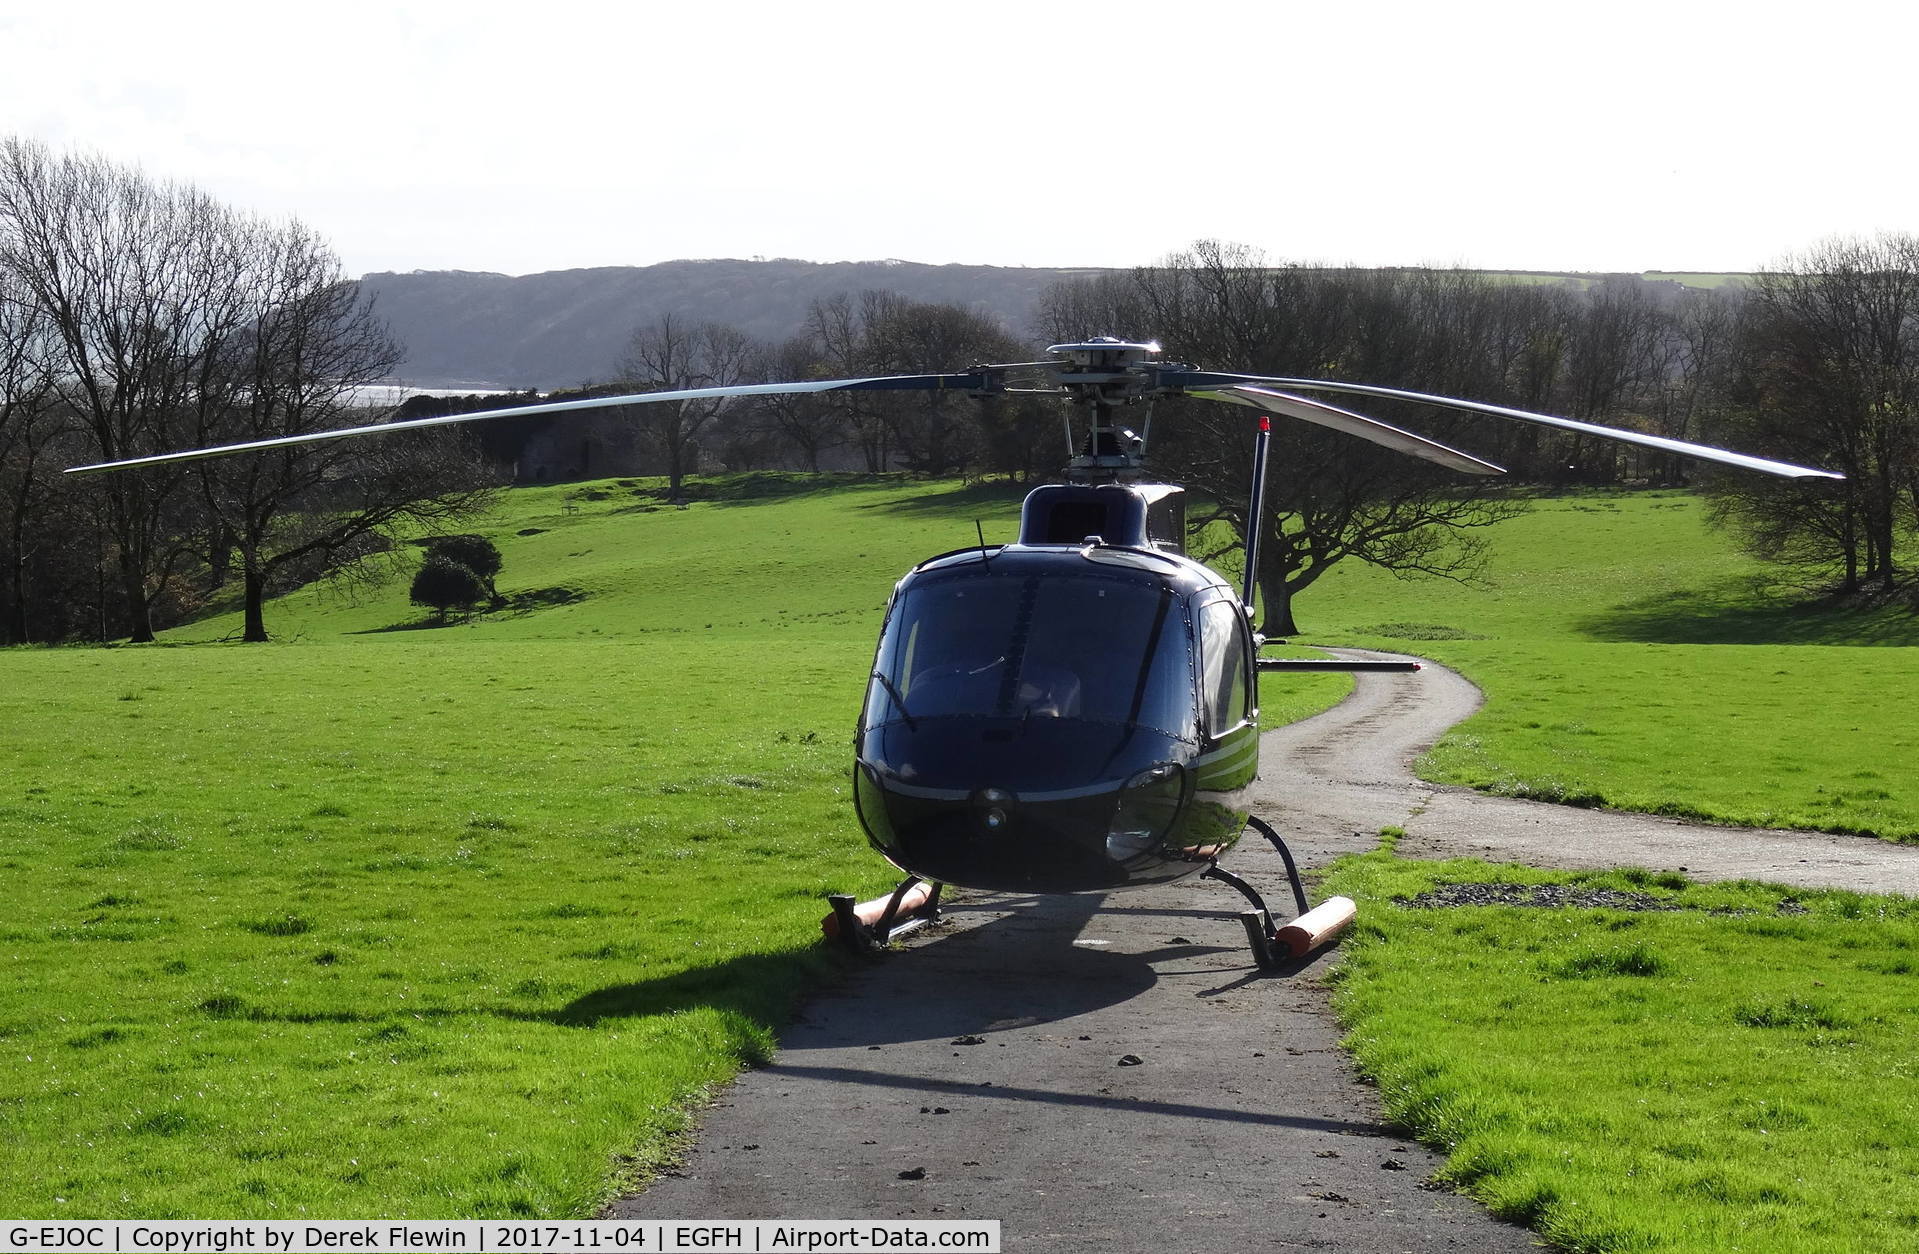 G-EJOC, 1981 Aerospatiale AS-350B Ecureuil C/N 1465, Ecureuil, local resident seen parked up overlooking Oxwich Bay.